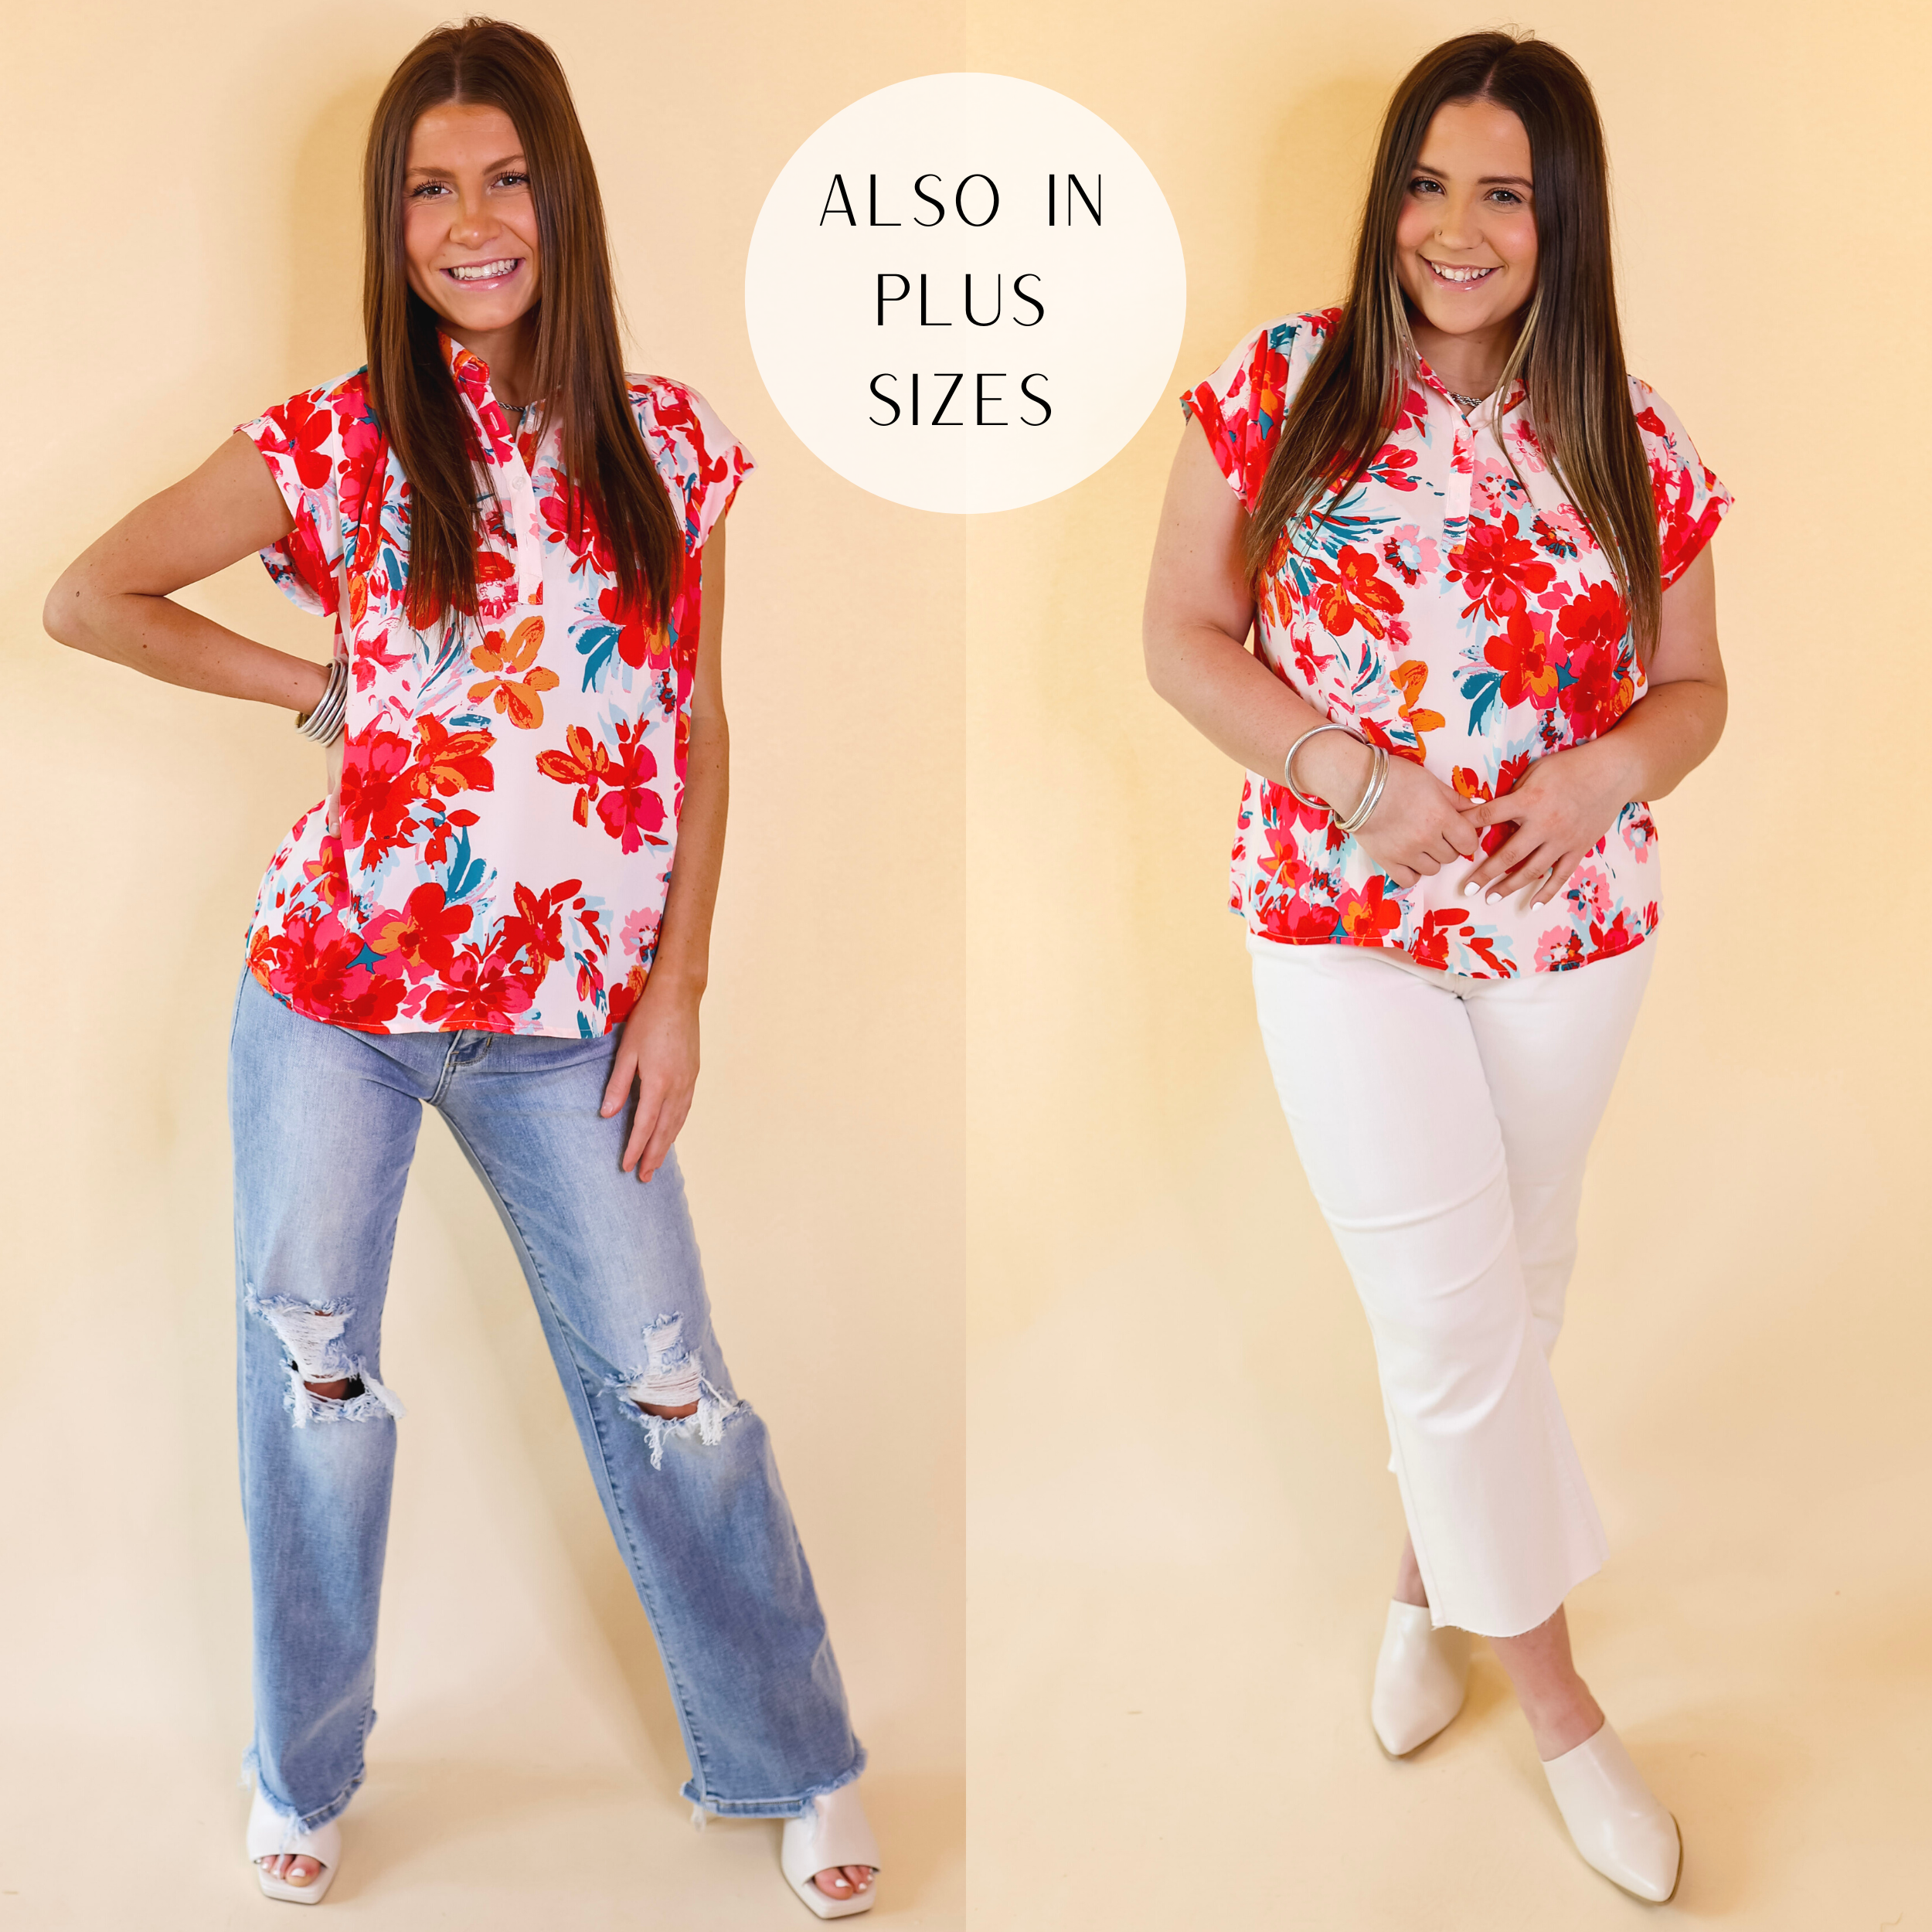 Models are wearing a short sleeve top with a half button up front and collared neckline. This top is ivory with a mix of red, pink, and orange flowers all over. Size small model has it paired with distressed jeans, ivory heels, and silver jewelry. Size large model has it paired with ivory mules, silver jewelry, and white jeans.